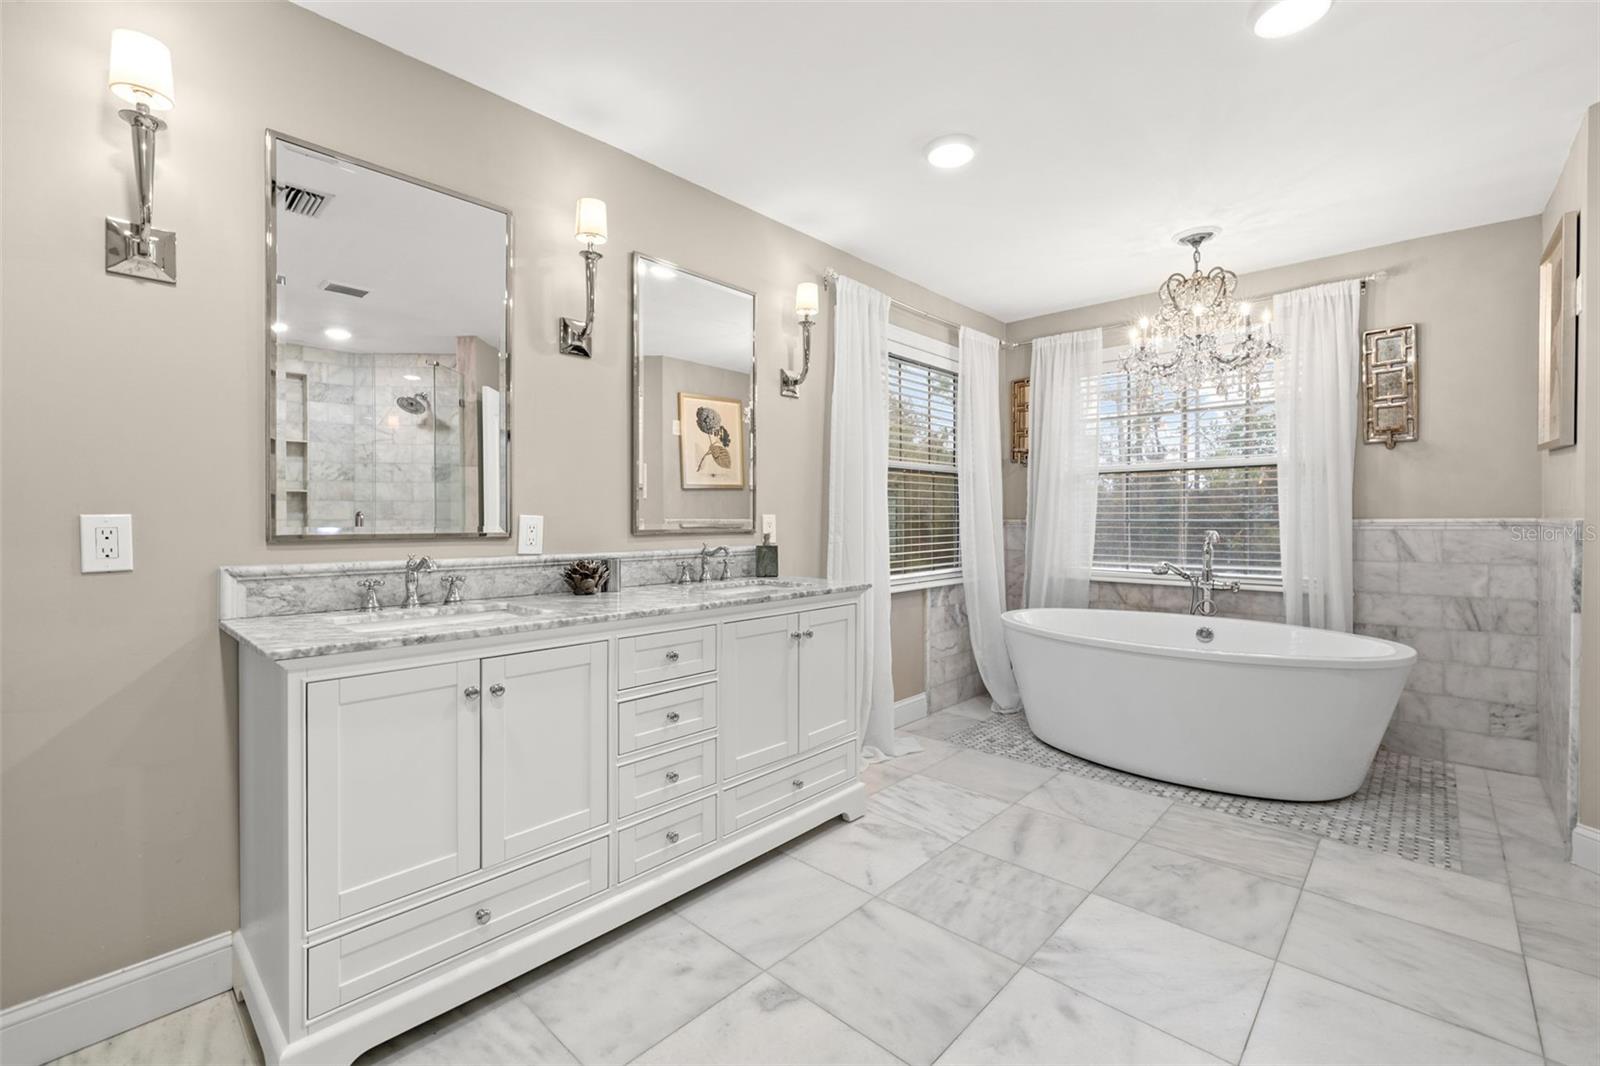 Renovated Primary Bathroom with marble throughout